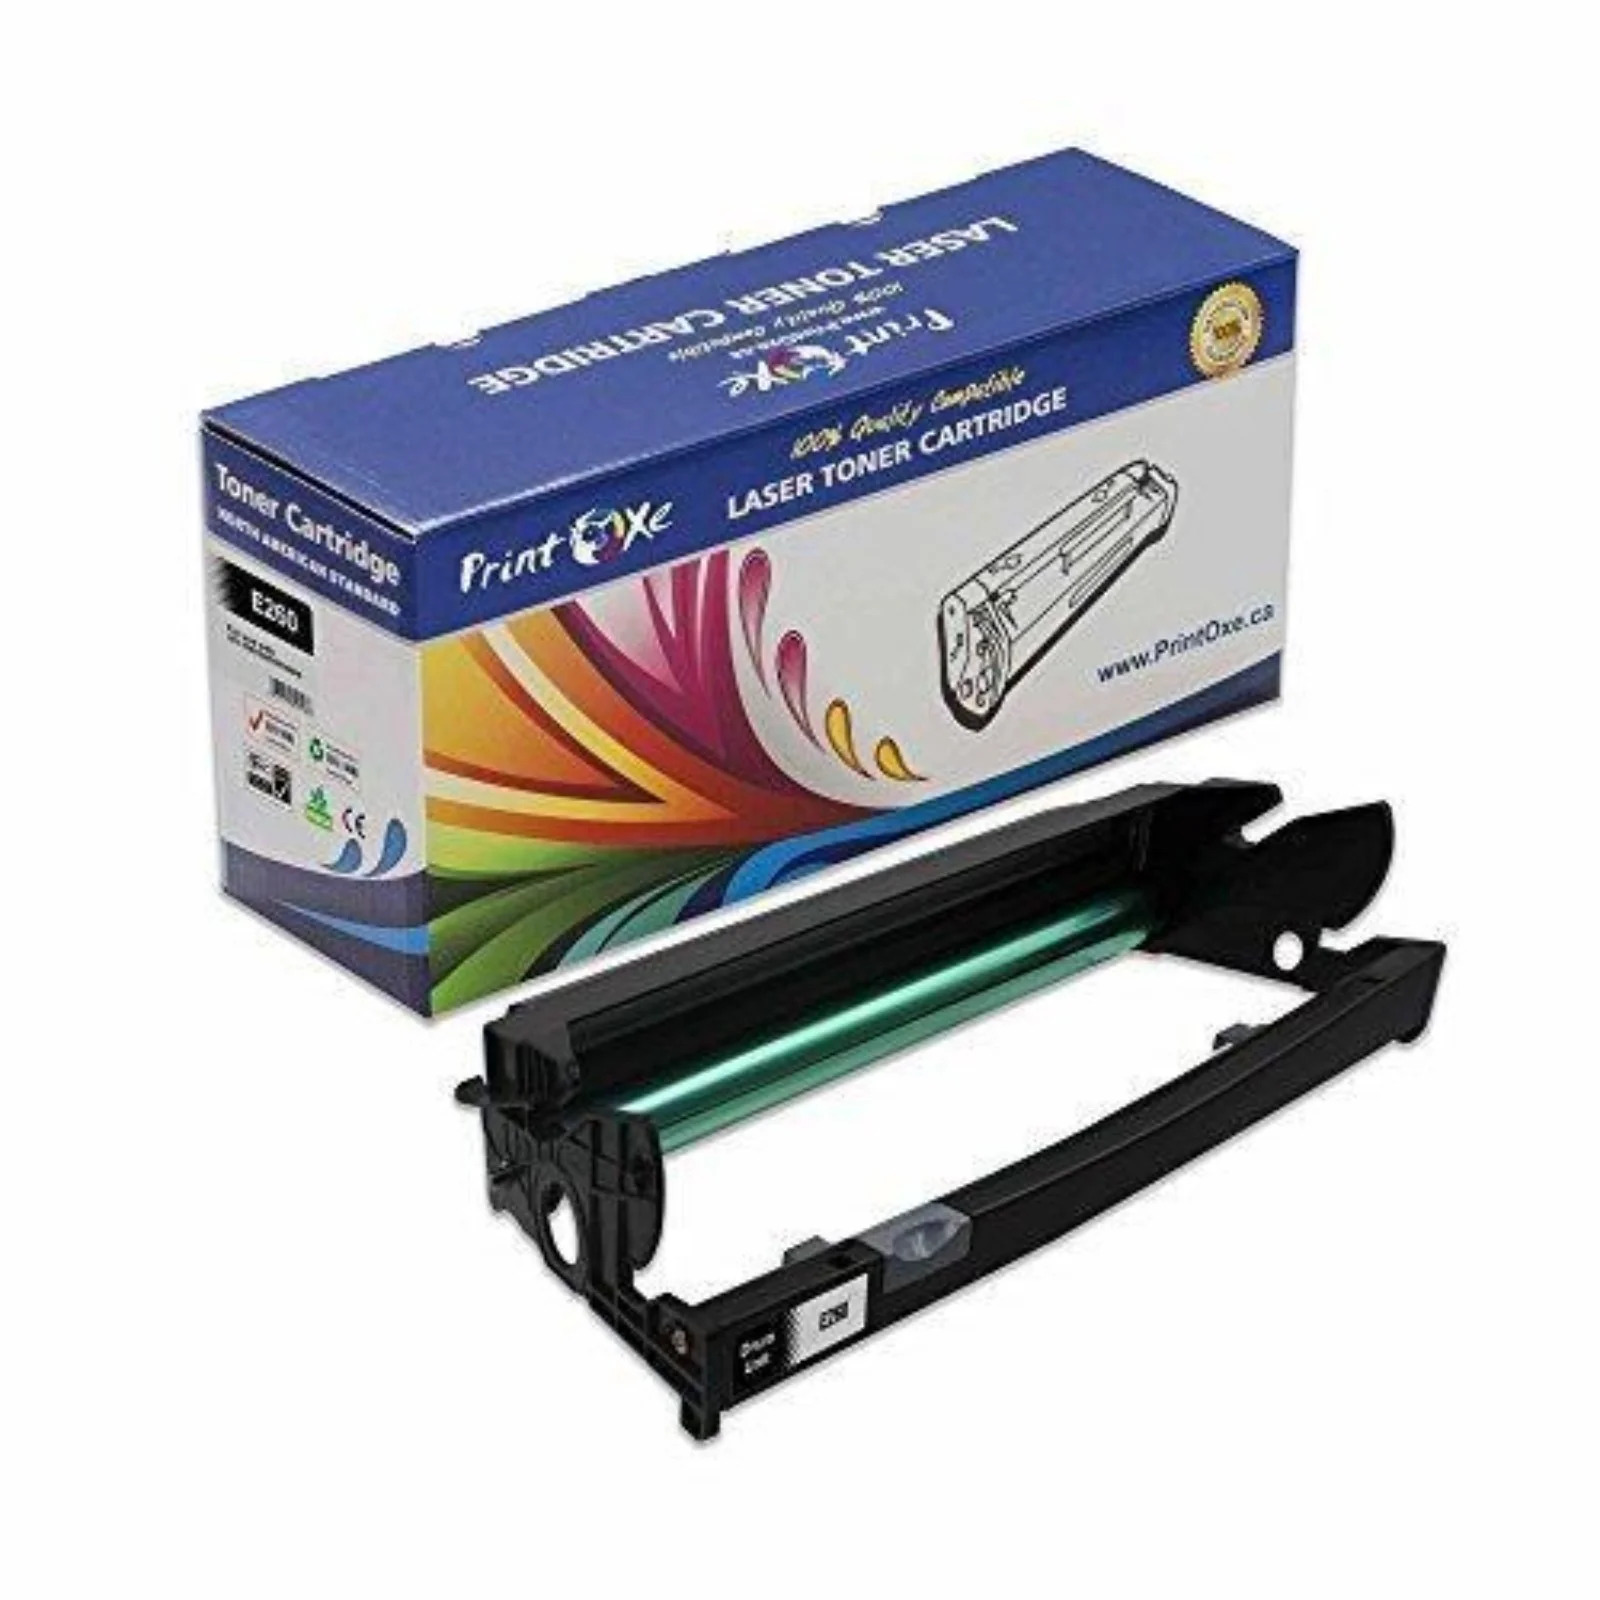 E260X22G Compatible Drum / Photoconductor E260 for Lexmark - image 1 of 1